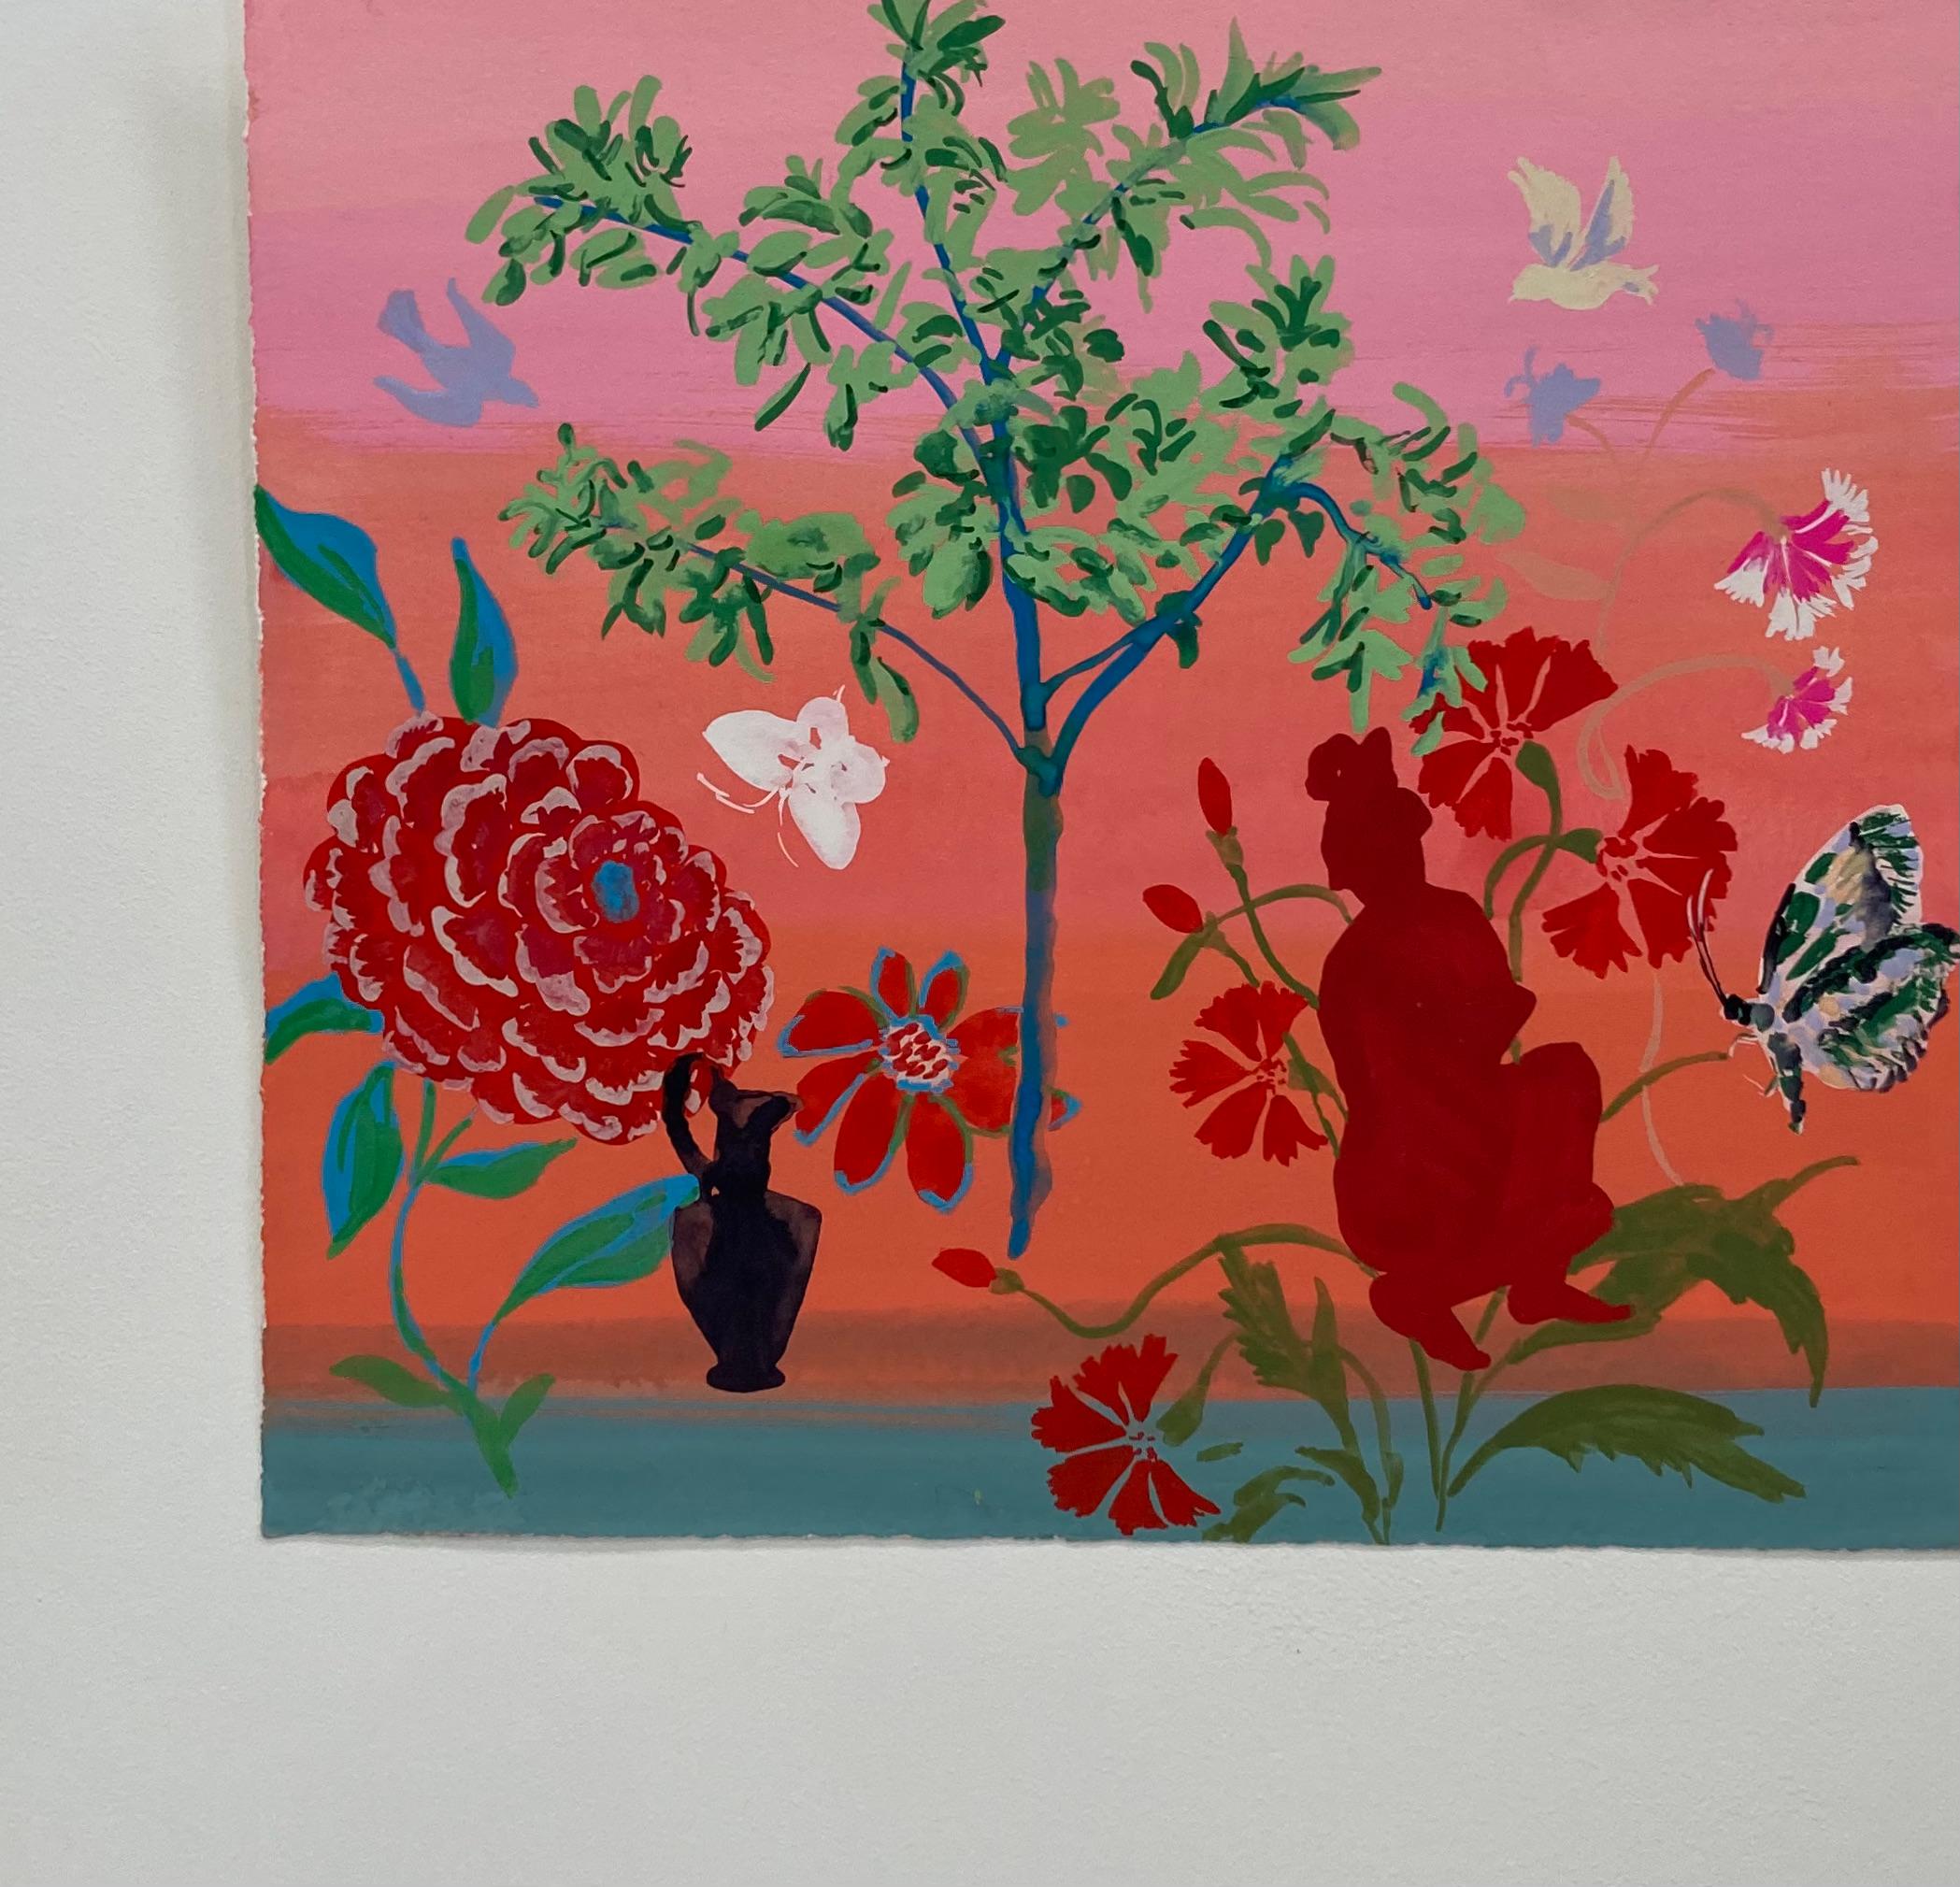 A female figure in red sits beside a pink and black butterfly, surrounded by brightly colored flowers in red and bright pink and a black urn next to a tree with green leaves in the center. The colorful figure, animals and lush hues of the flowers